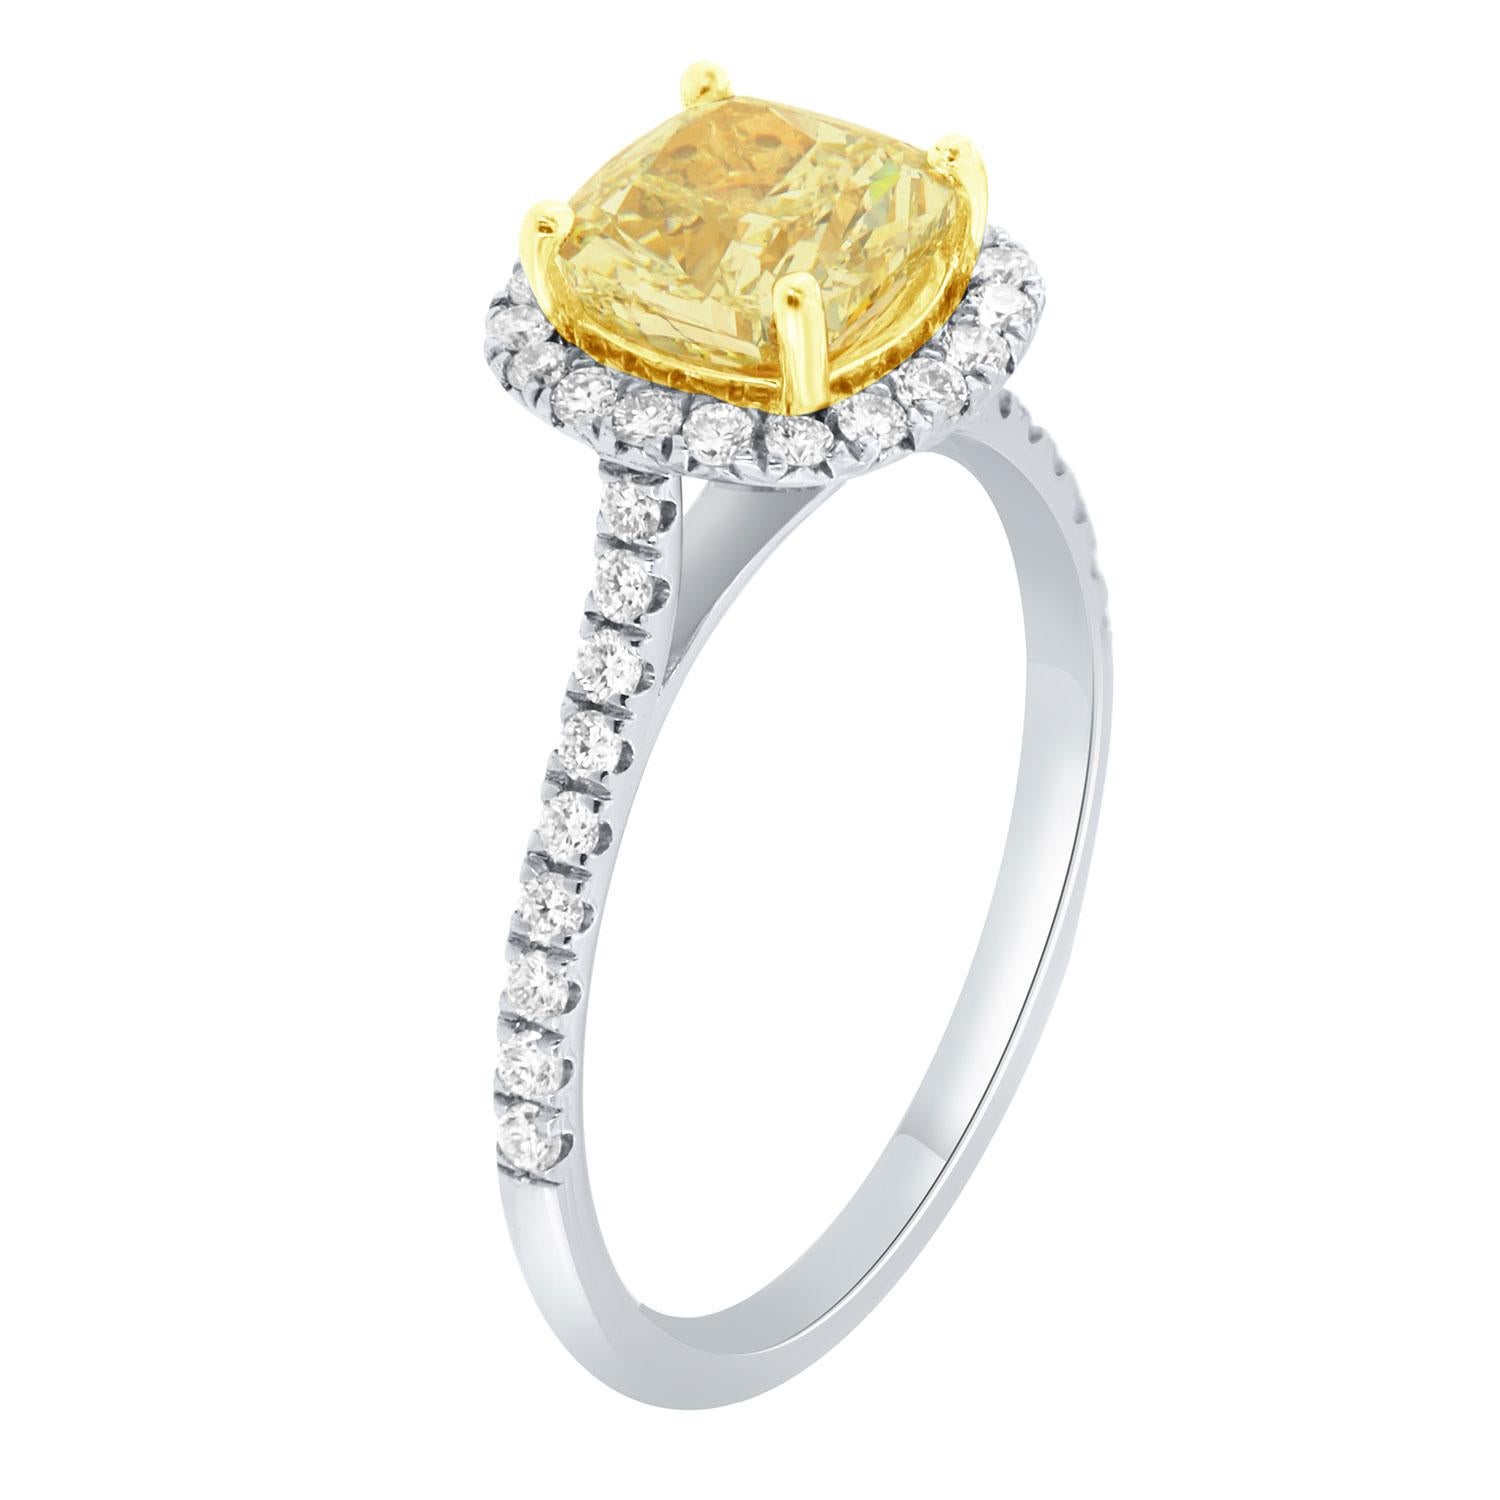 This 18K White and Yellow gold ring feature a 1.95-carat cushion-shaped yellow diamond. A halo of brilliant round diamonds encircles the center diamond. The band is 1.6 mm wide and contains one row of diamonds Micro-Prong set on 50% of it. The